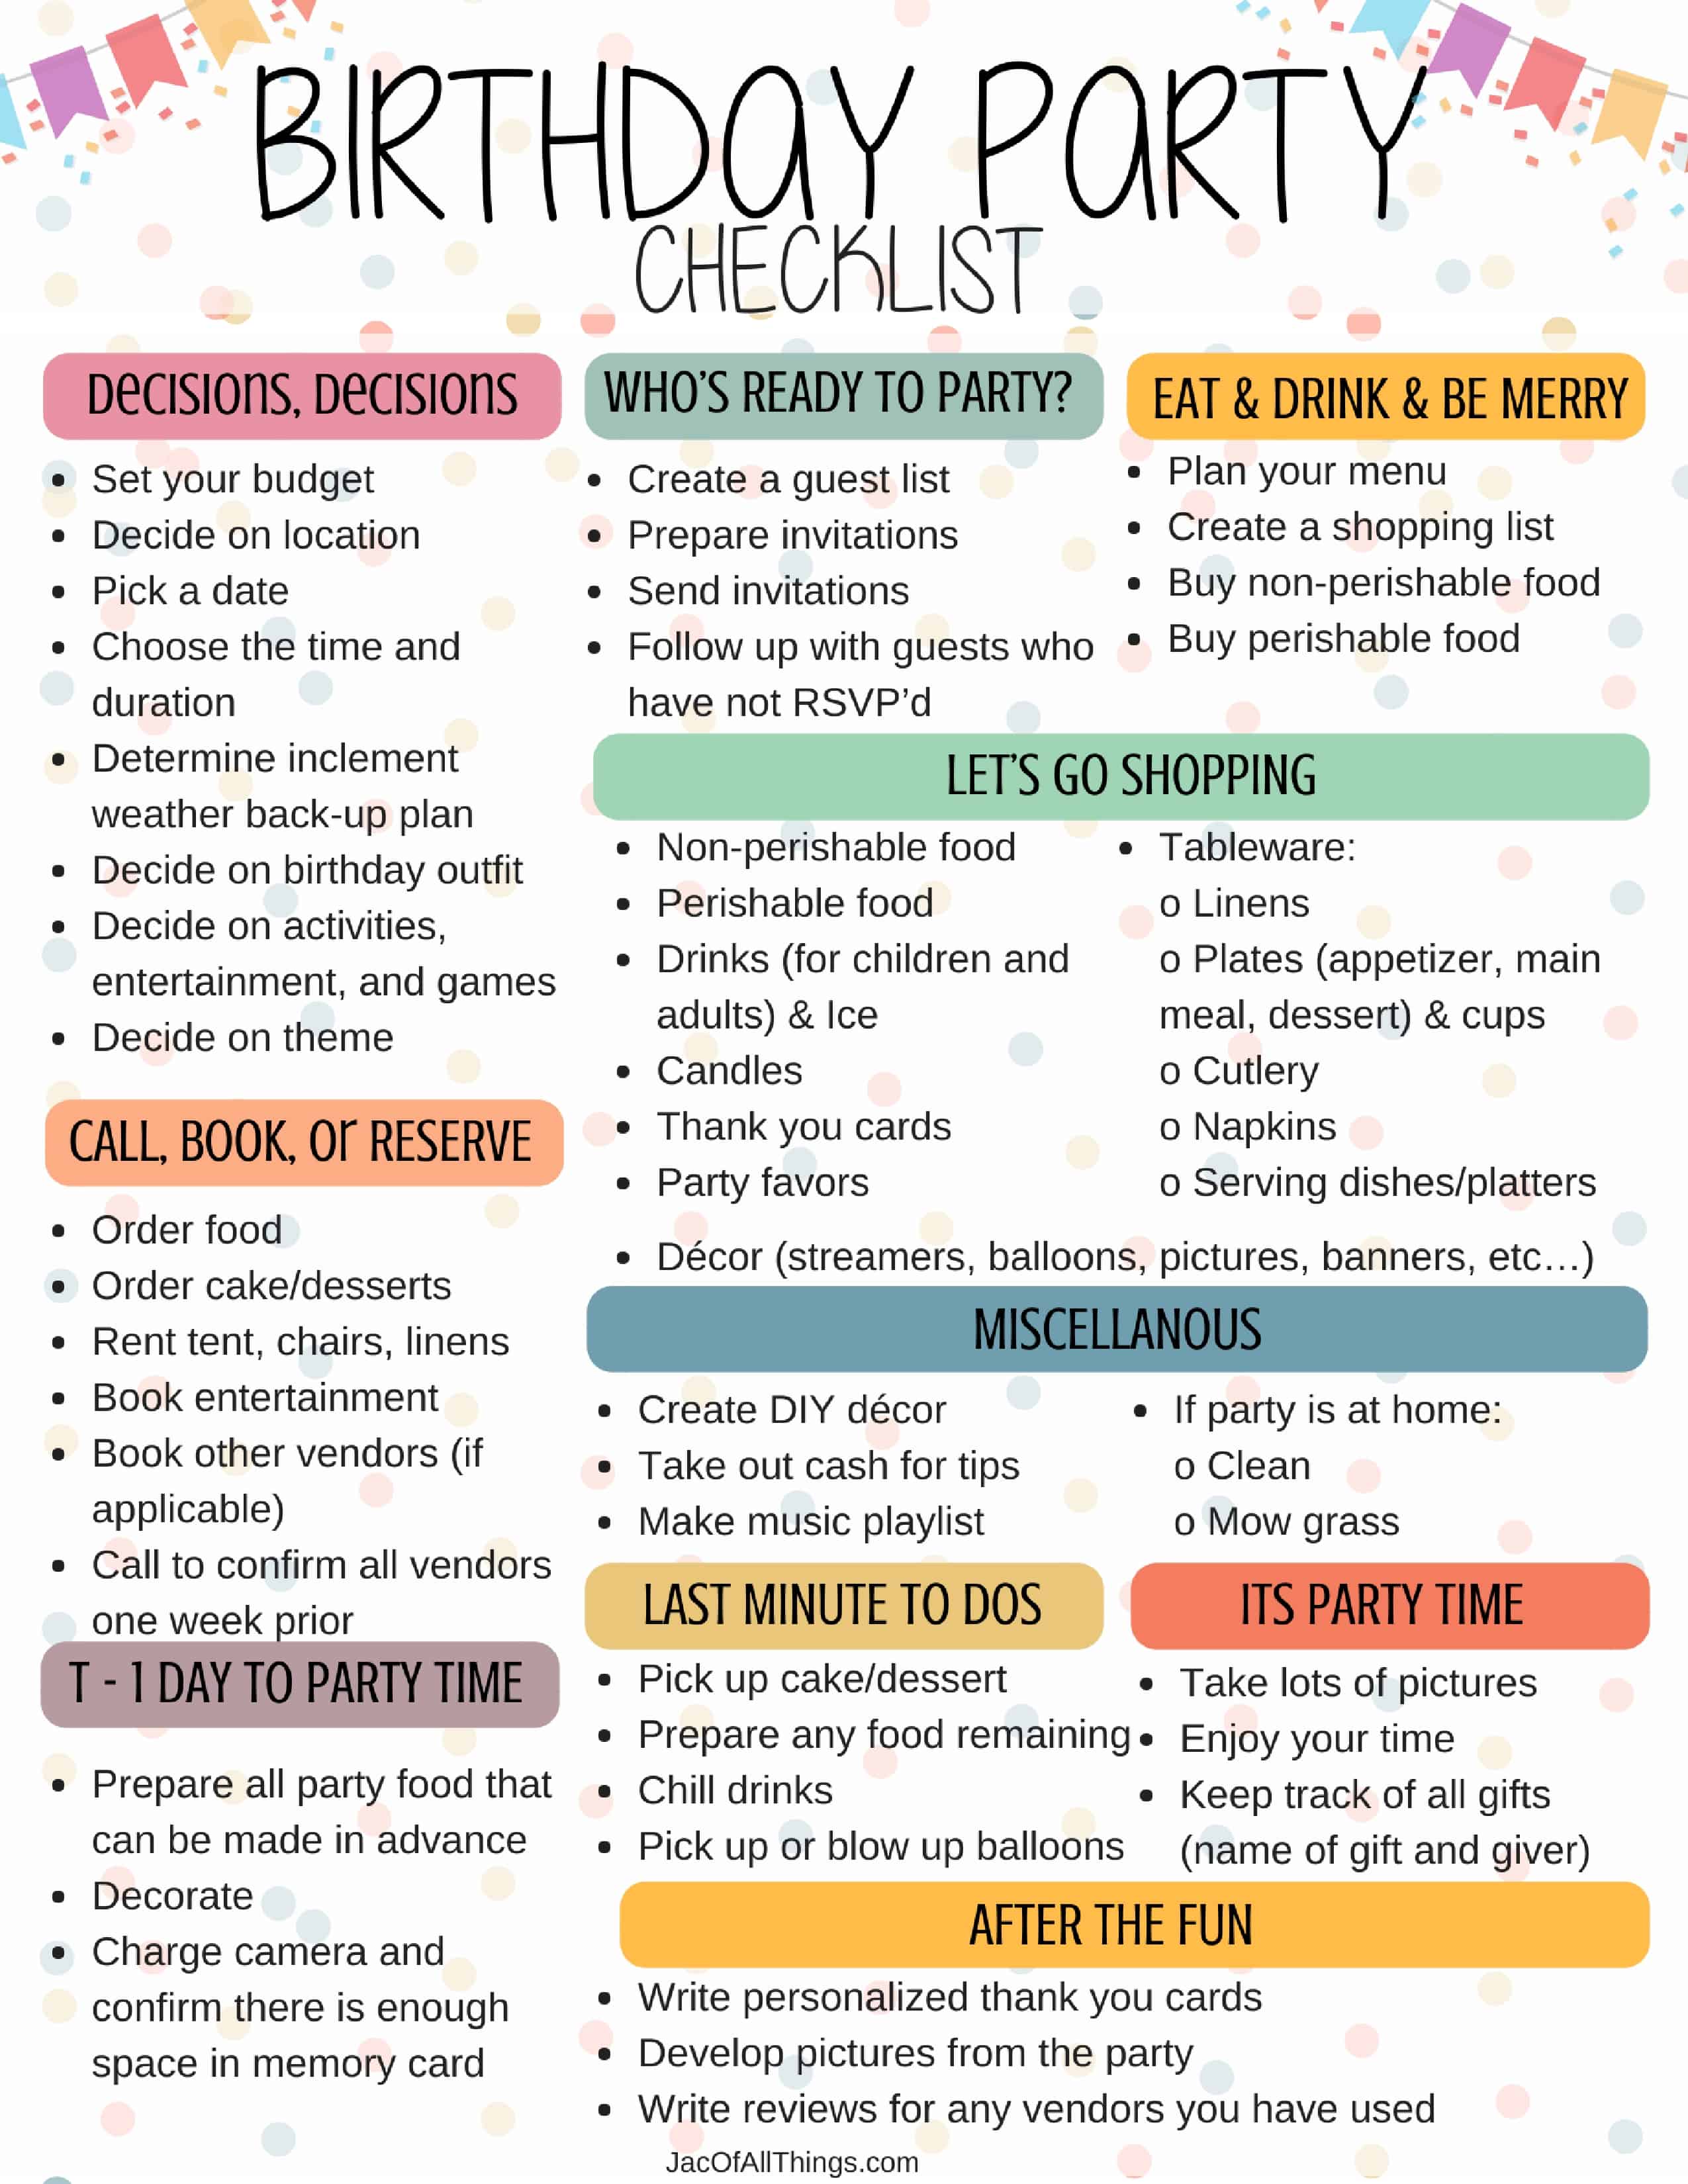 How to plan a birthday party checklist with free printable party planning worksheet. This complete party planning guide will walk you through party planning tips, party planning timeline, and make the planning process as stress-free as possible. The ultimate template on how to plan a birthday party for children/kids at home (to print). Perfect for planners!